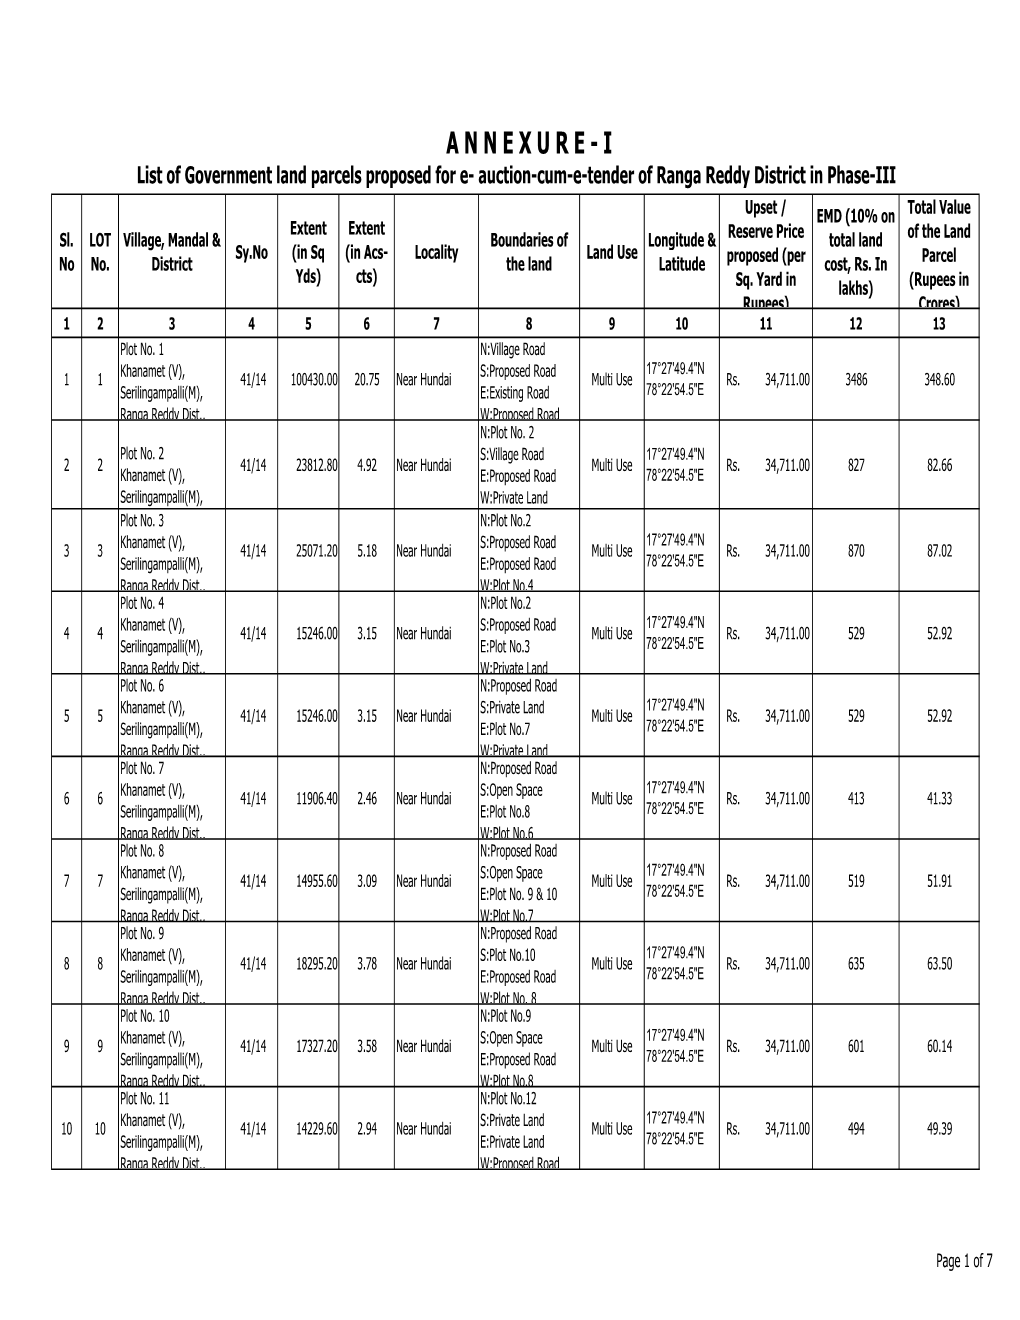 A N N E X U R E - I List of Government Land Parcels Proposed for E- Auction-Cum-E-Tender of Ranga Reddy District in Phase-III